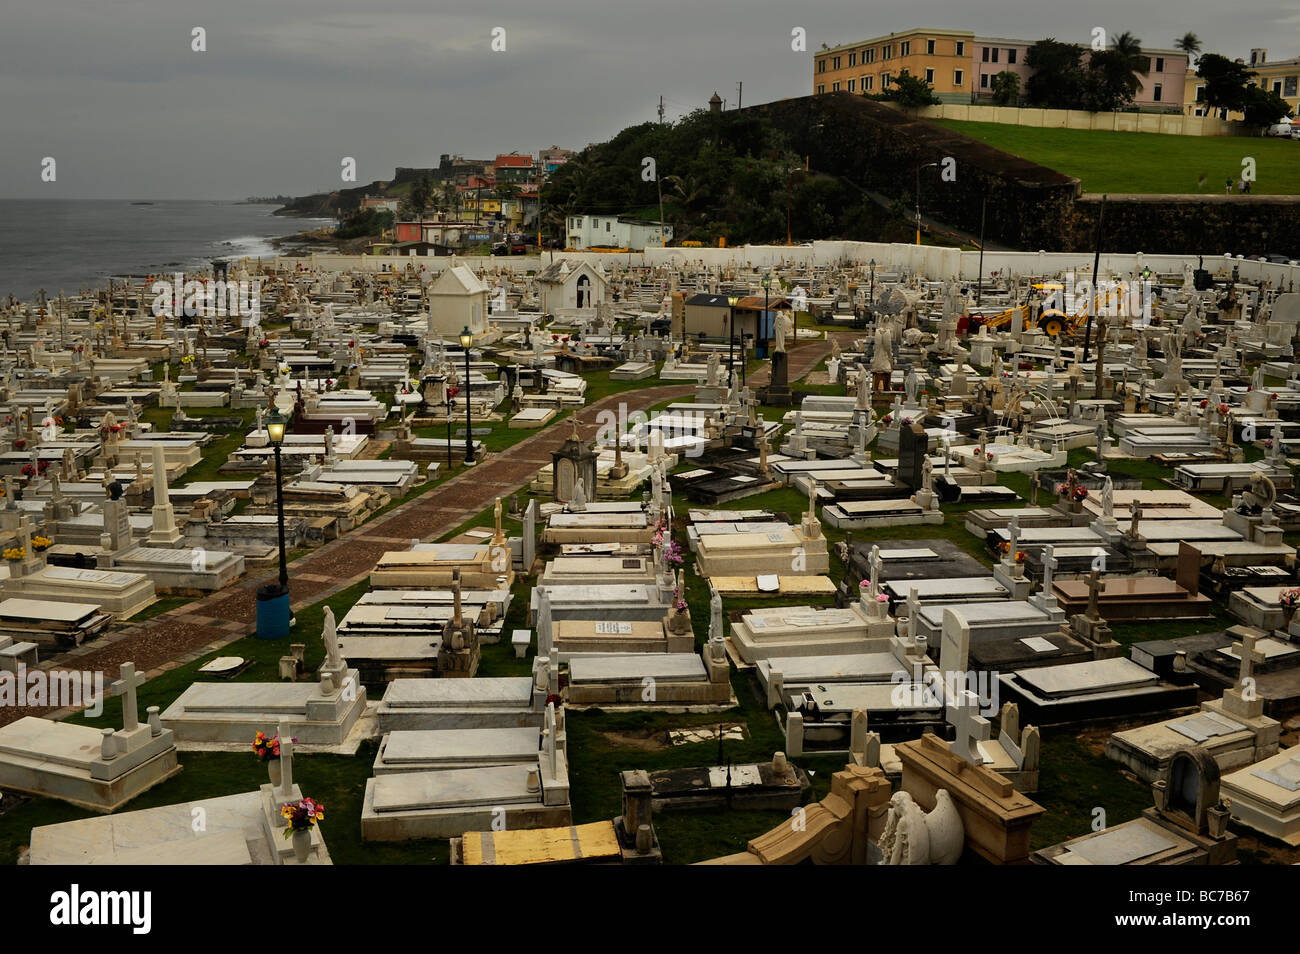 Tombs of the Cemetery in Old San Juan, Puerto Ric o Stock Photo